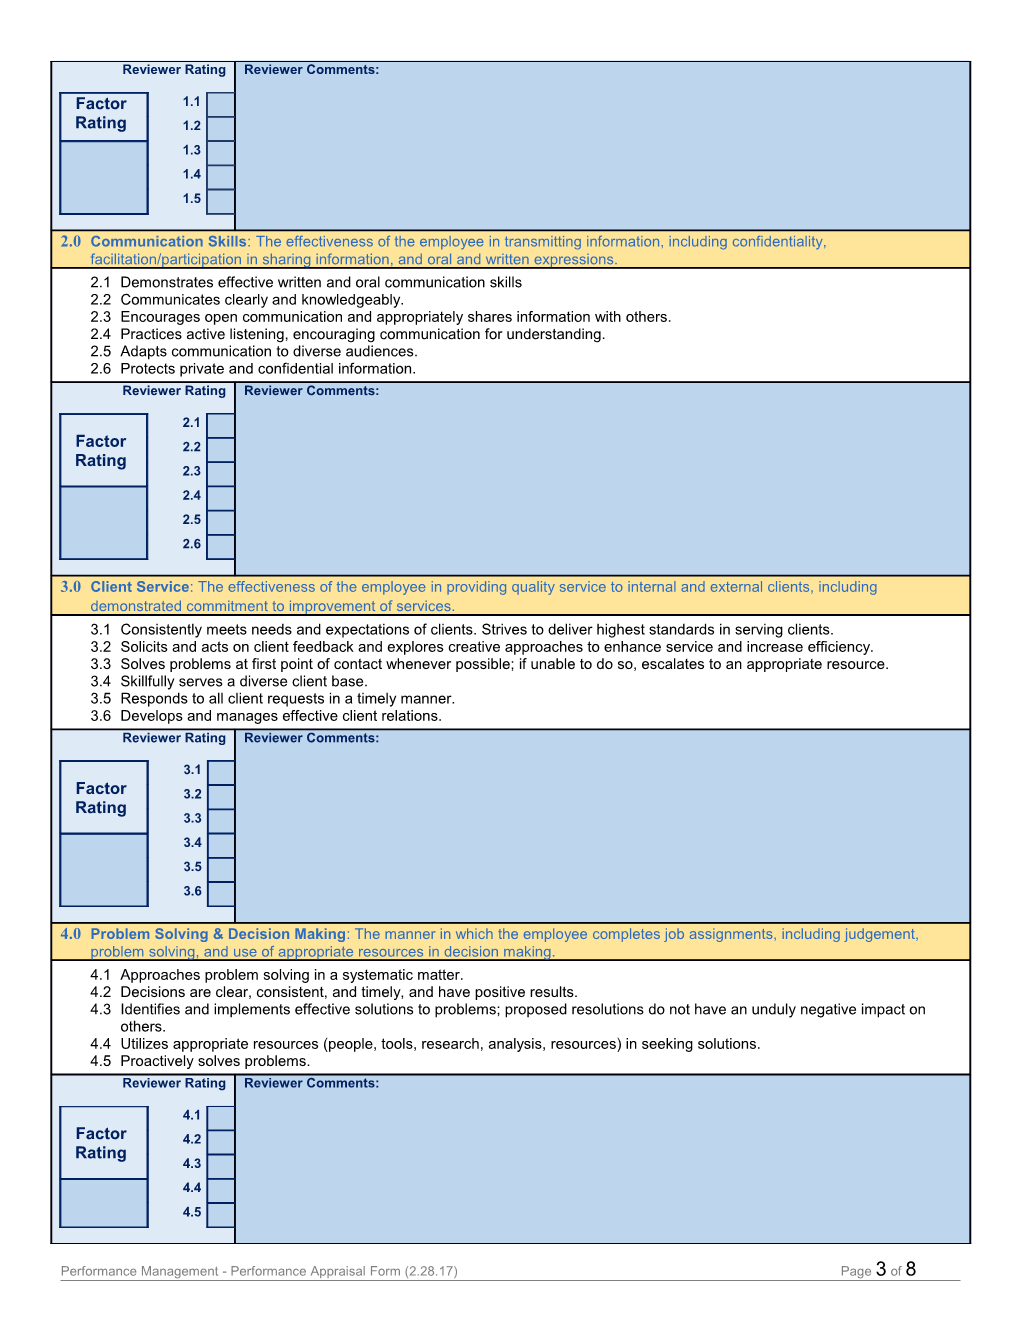 Performance Management - Performance Appraisal Form (2.28.17)Page 1 of 8